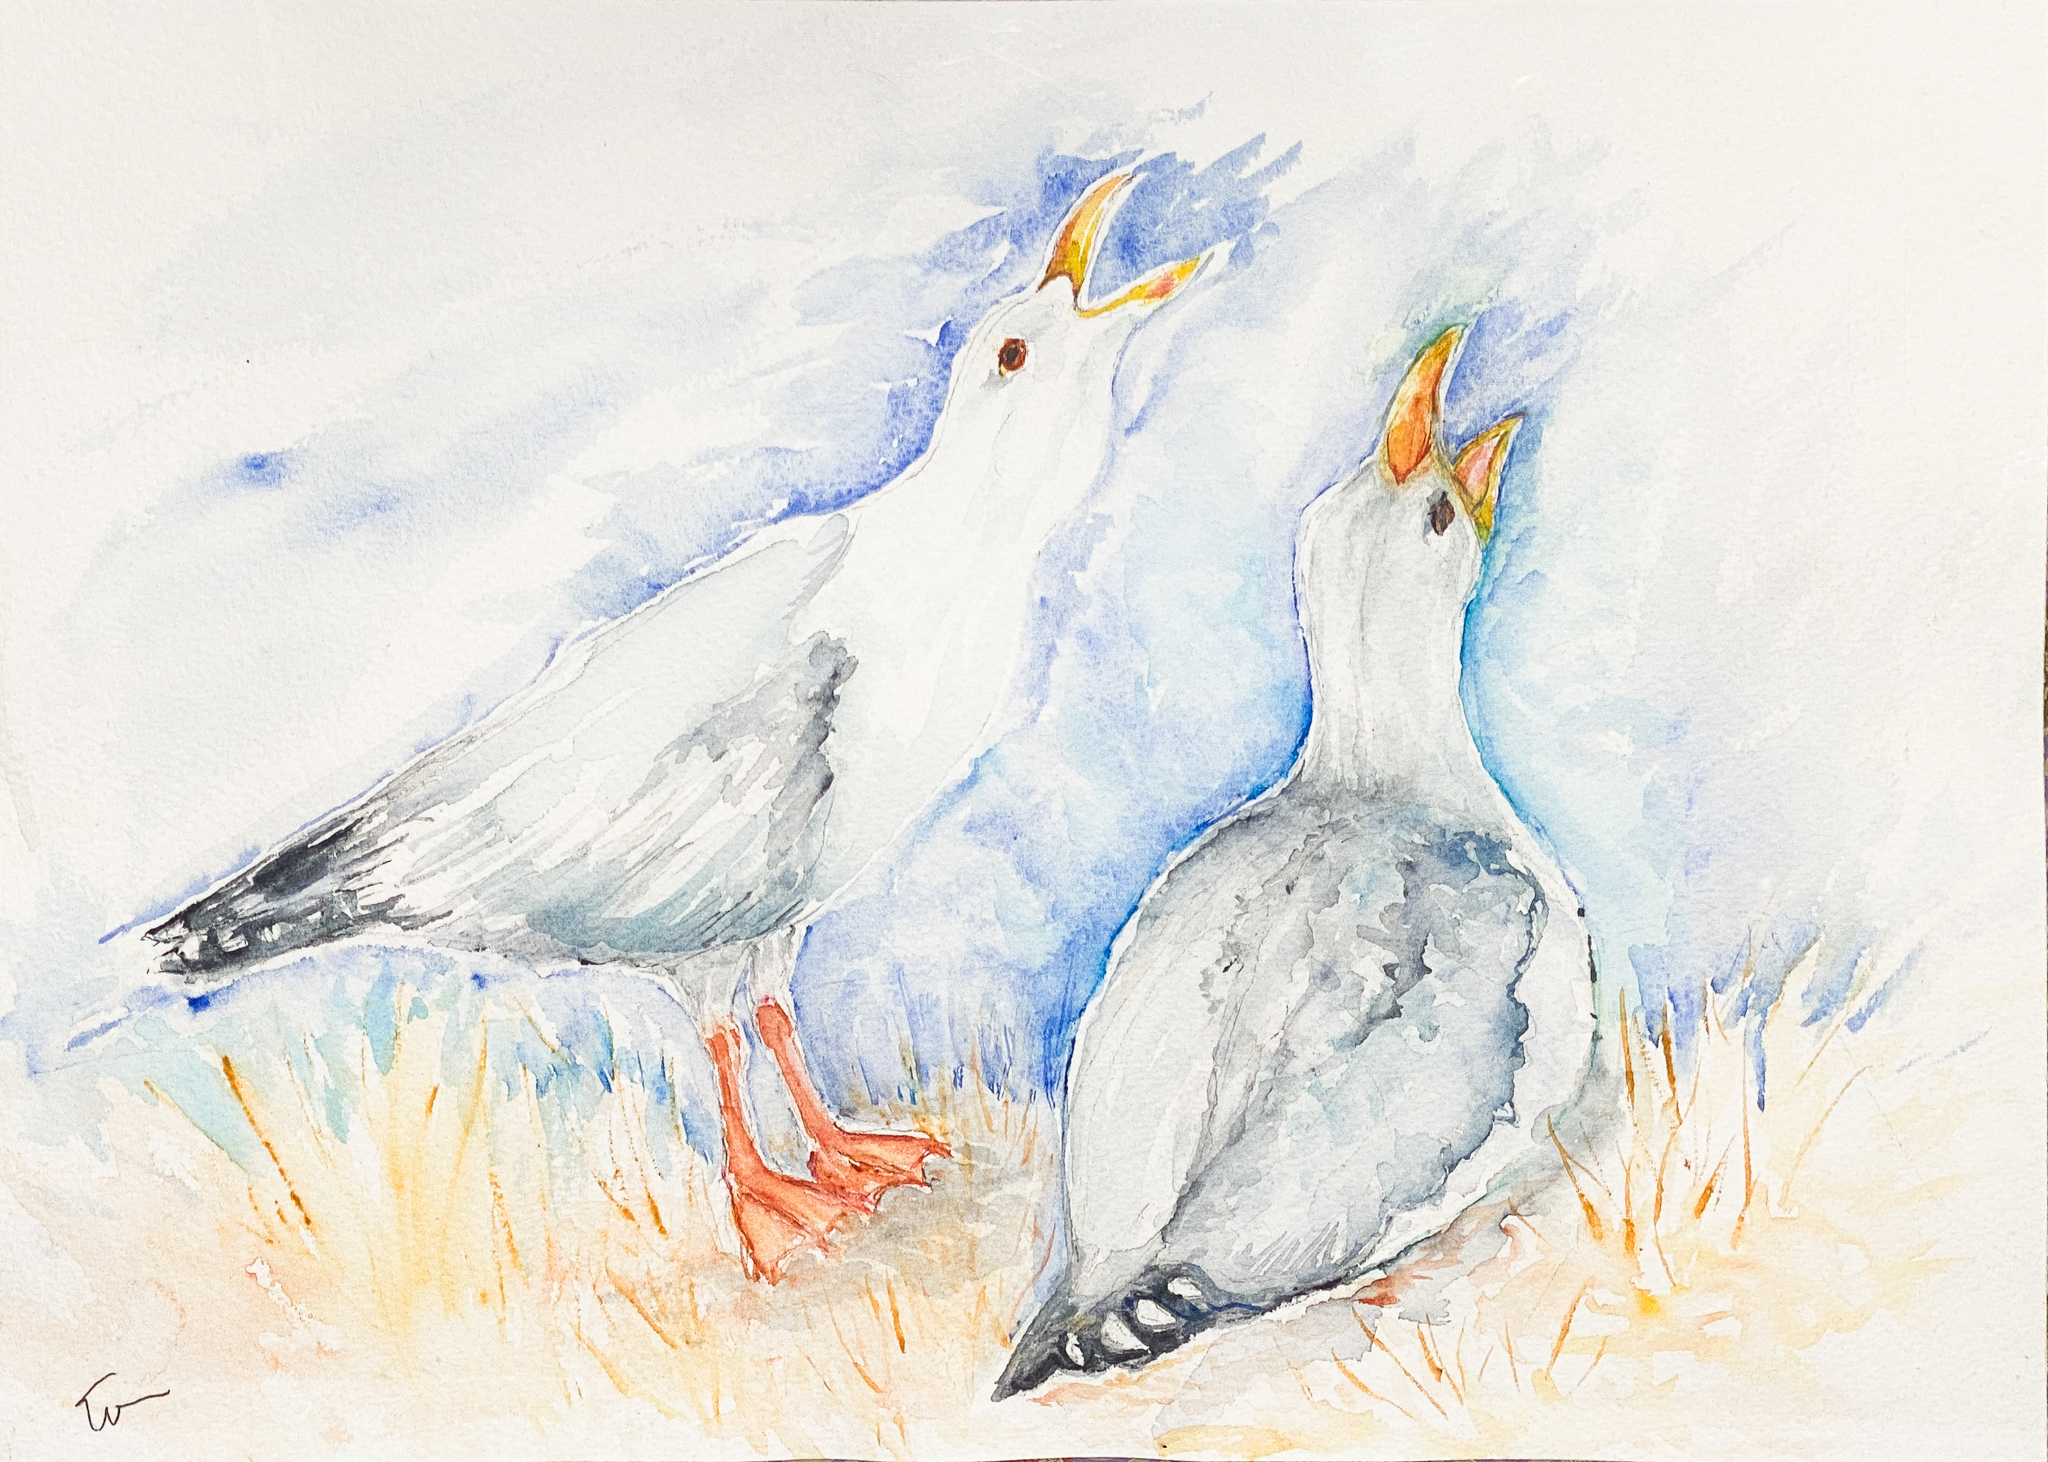 Raucous Seagulls It was the courting season for seagulls when she painted this watercolour. This pair claimed the area in front of the house. Painting from photos, she captured that raucousness they’re so known for. Elaine is a lover of all birds and painting them is another way to connect with them.